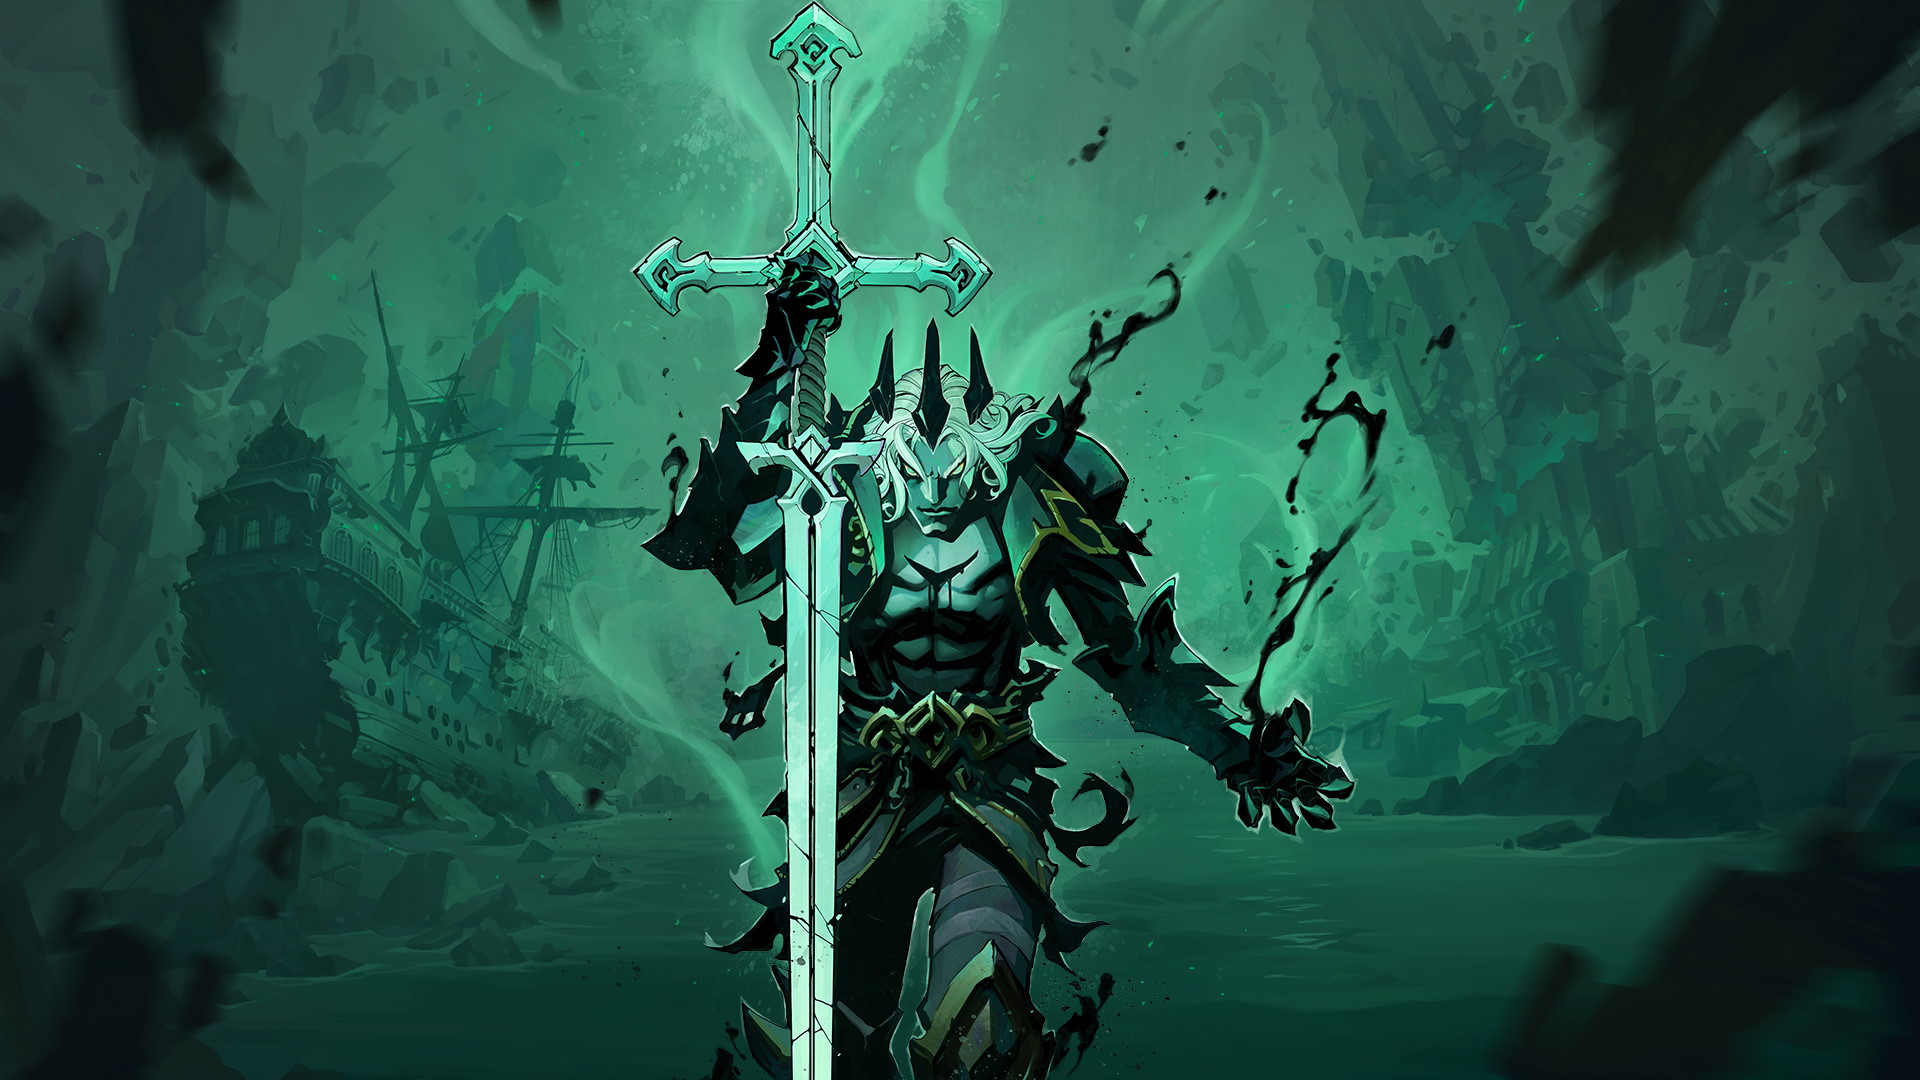  Valorant's League of Legends tie-in adds a mammoth spectral sword 